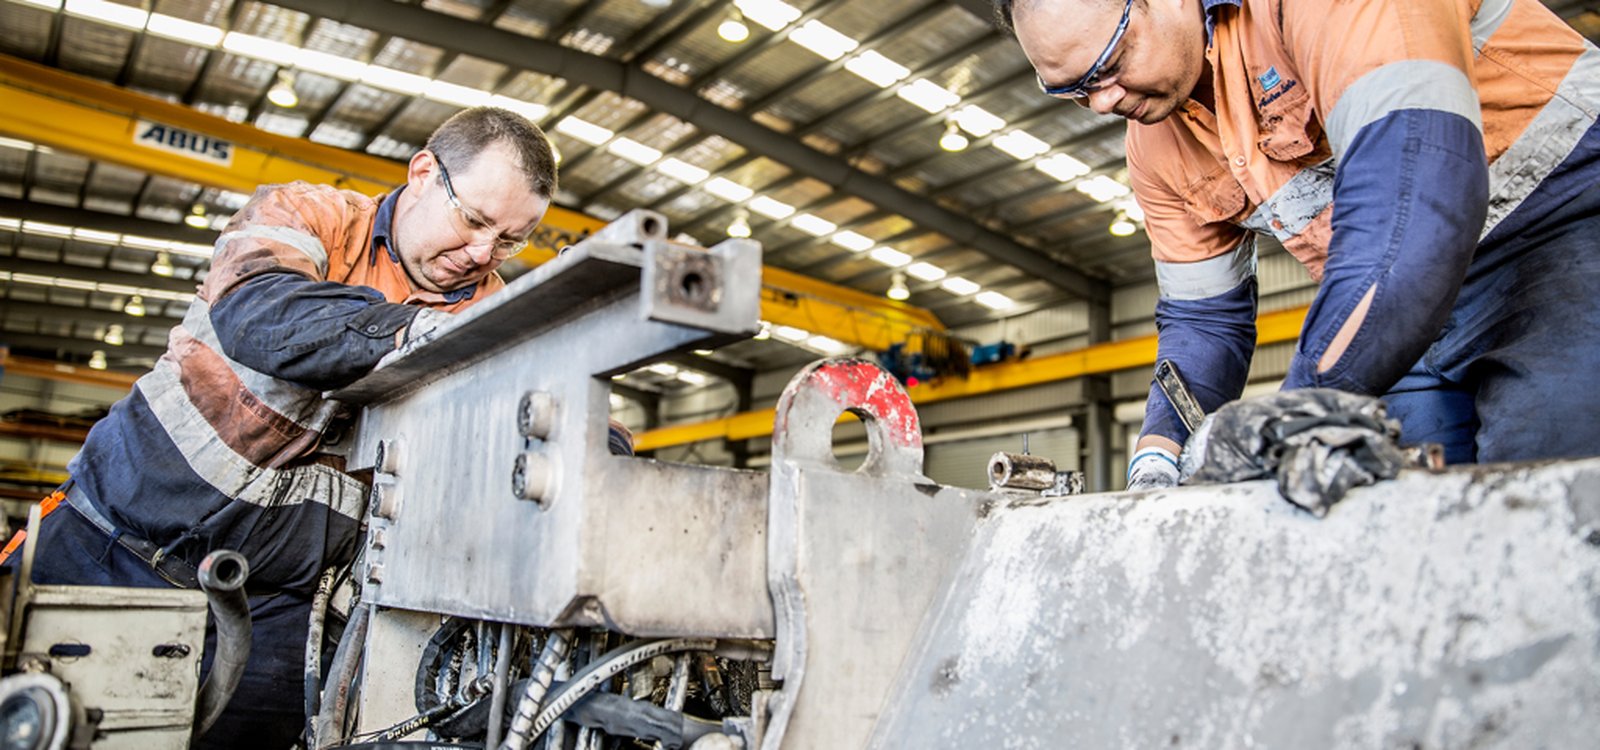 All Sandvik rebuild technicians receive continuous training to maintain and increase their knowledge, capability and skills.